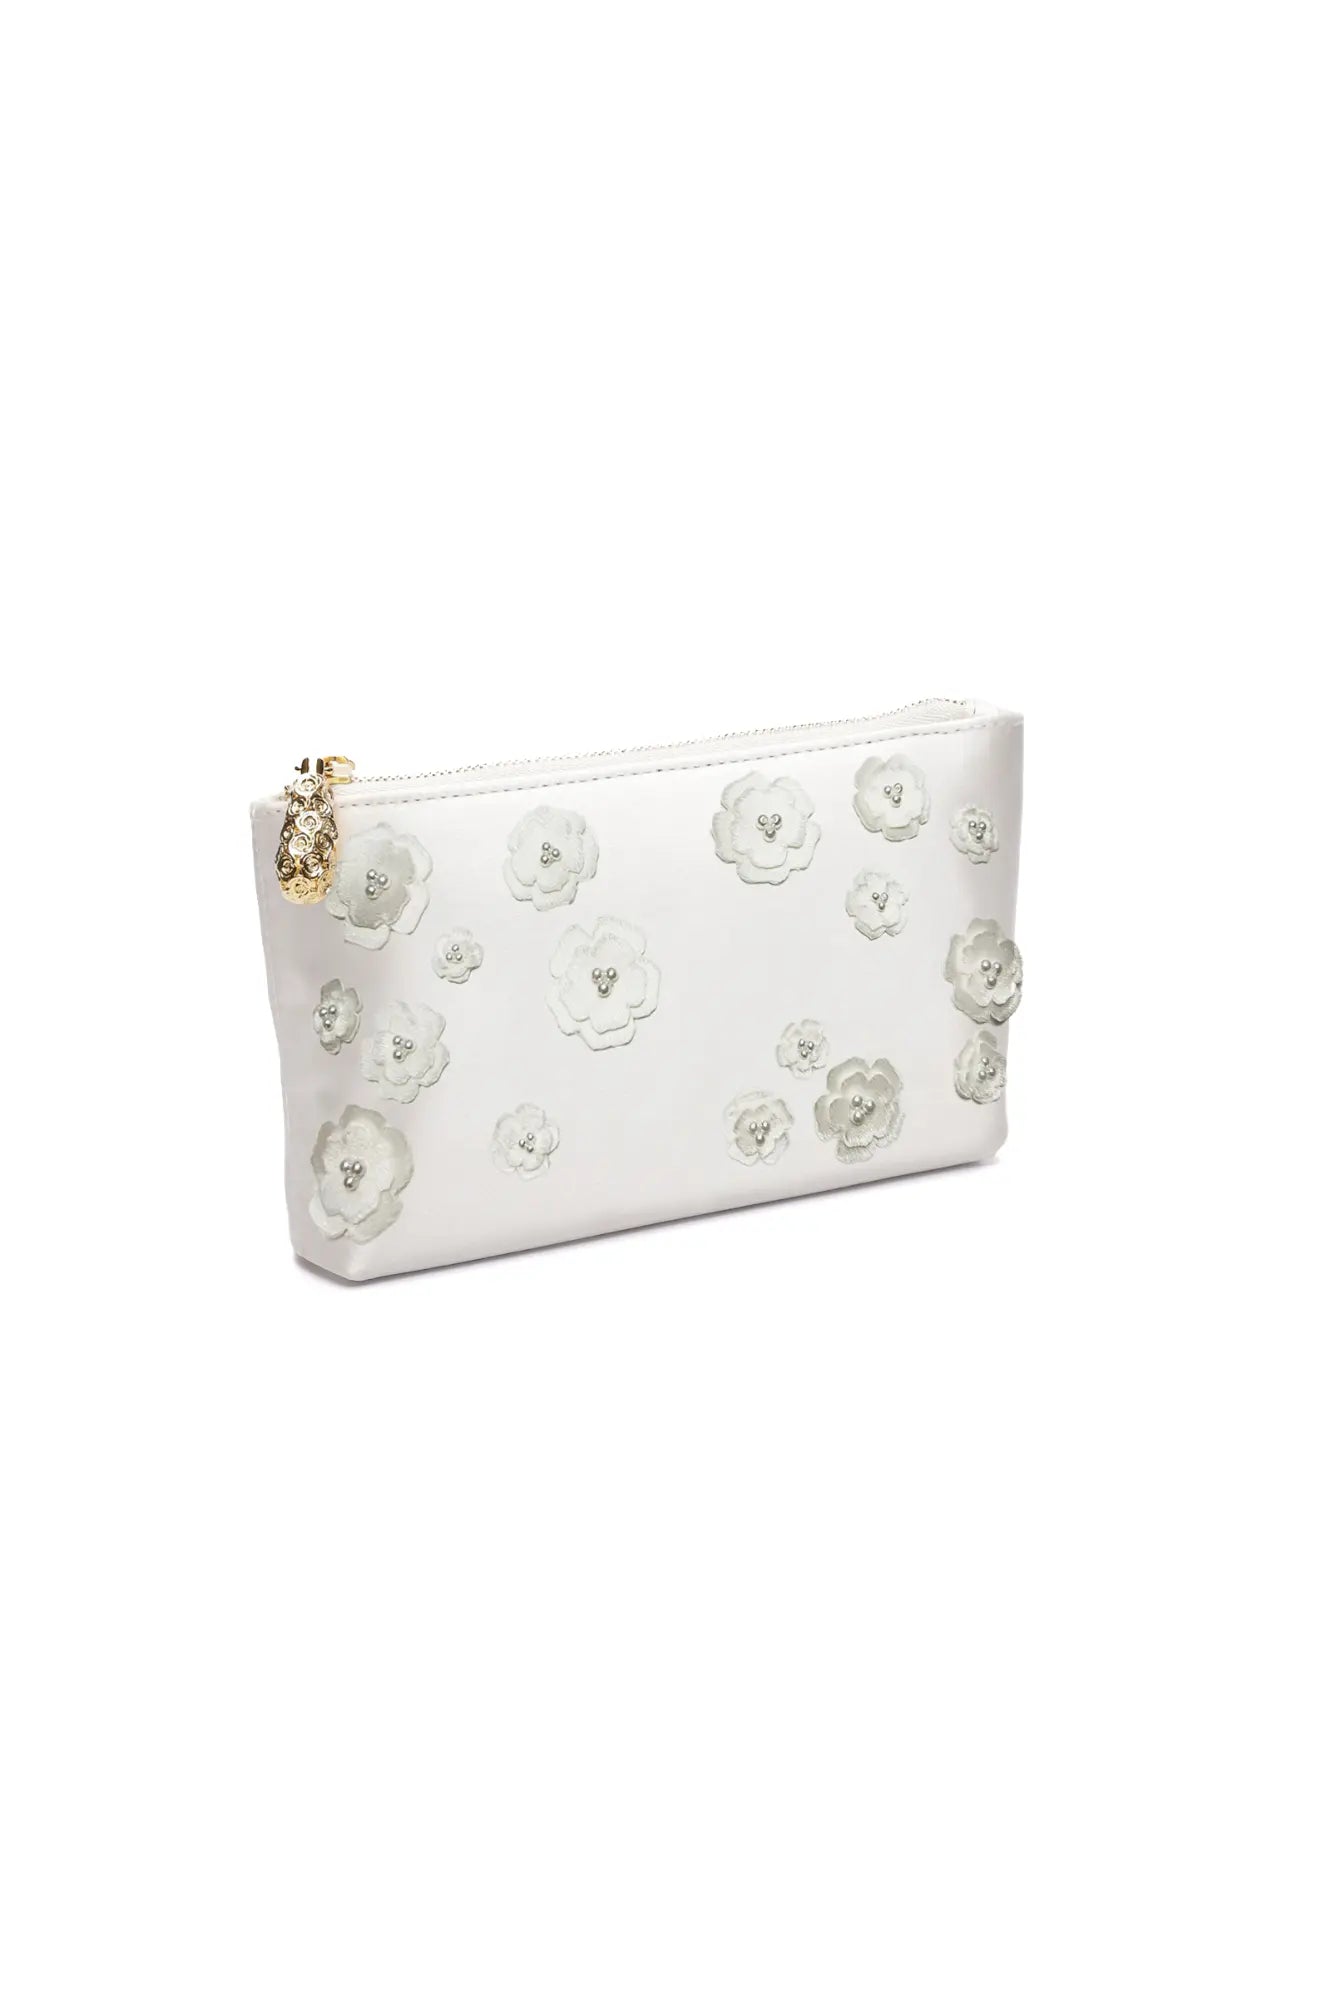 Duchess Satin white floral Hayden Clutch - 3D Flowers cosmetic pouch with gold zipper pull on a plain background by The Bella Rosa Collection.